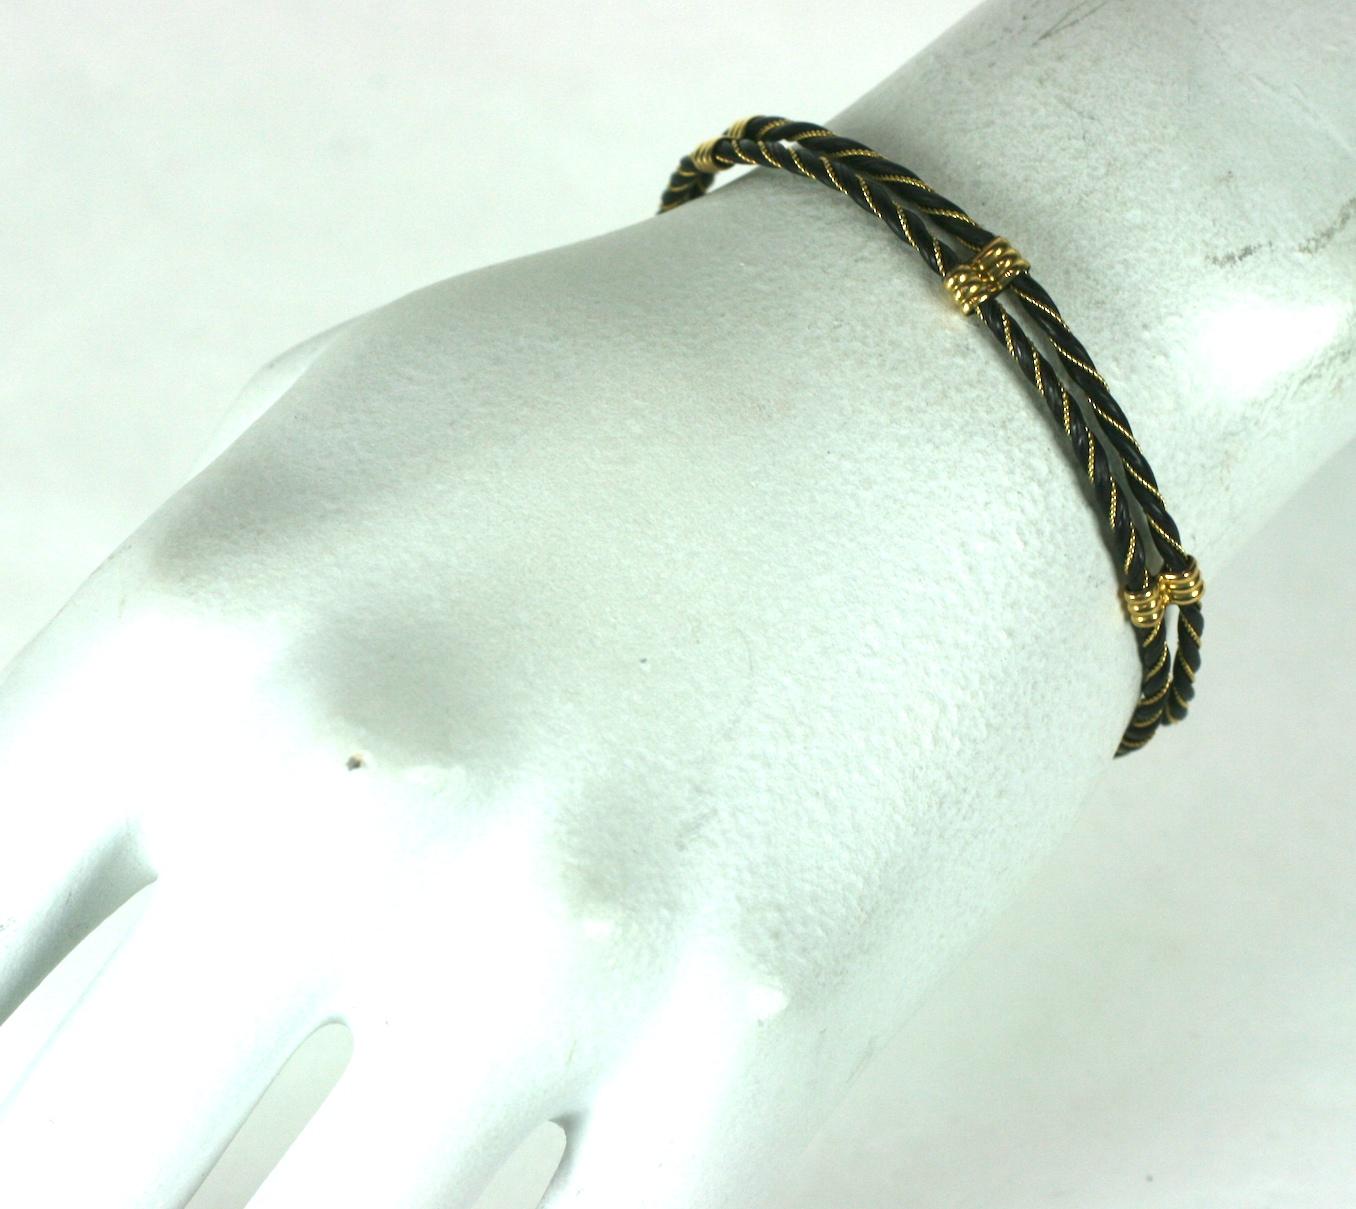 Braided Gold and Elephant Hair Bracelet For Sale at 1stDibs